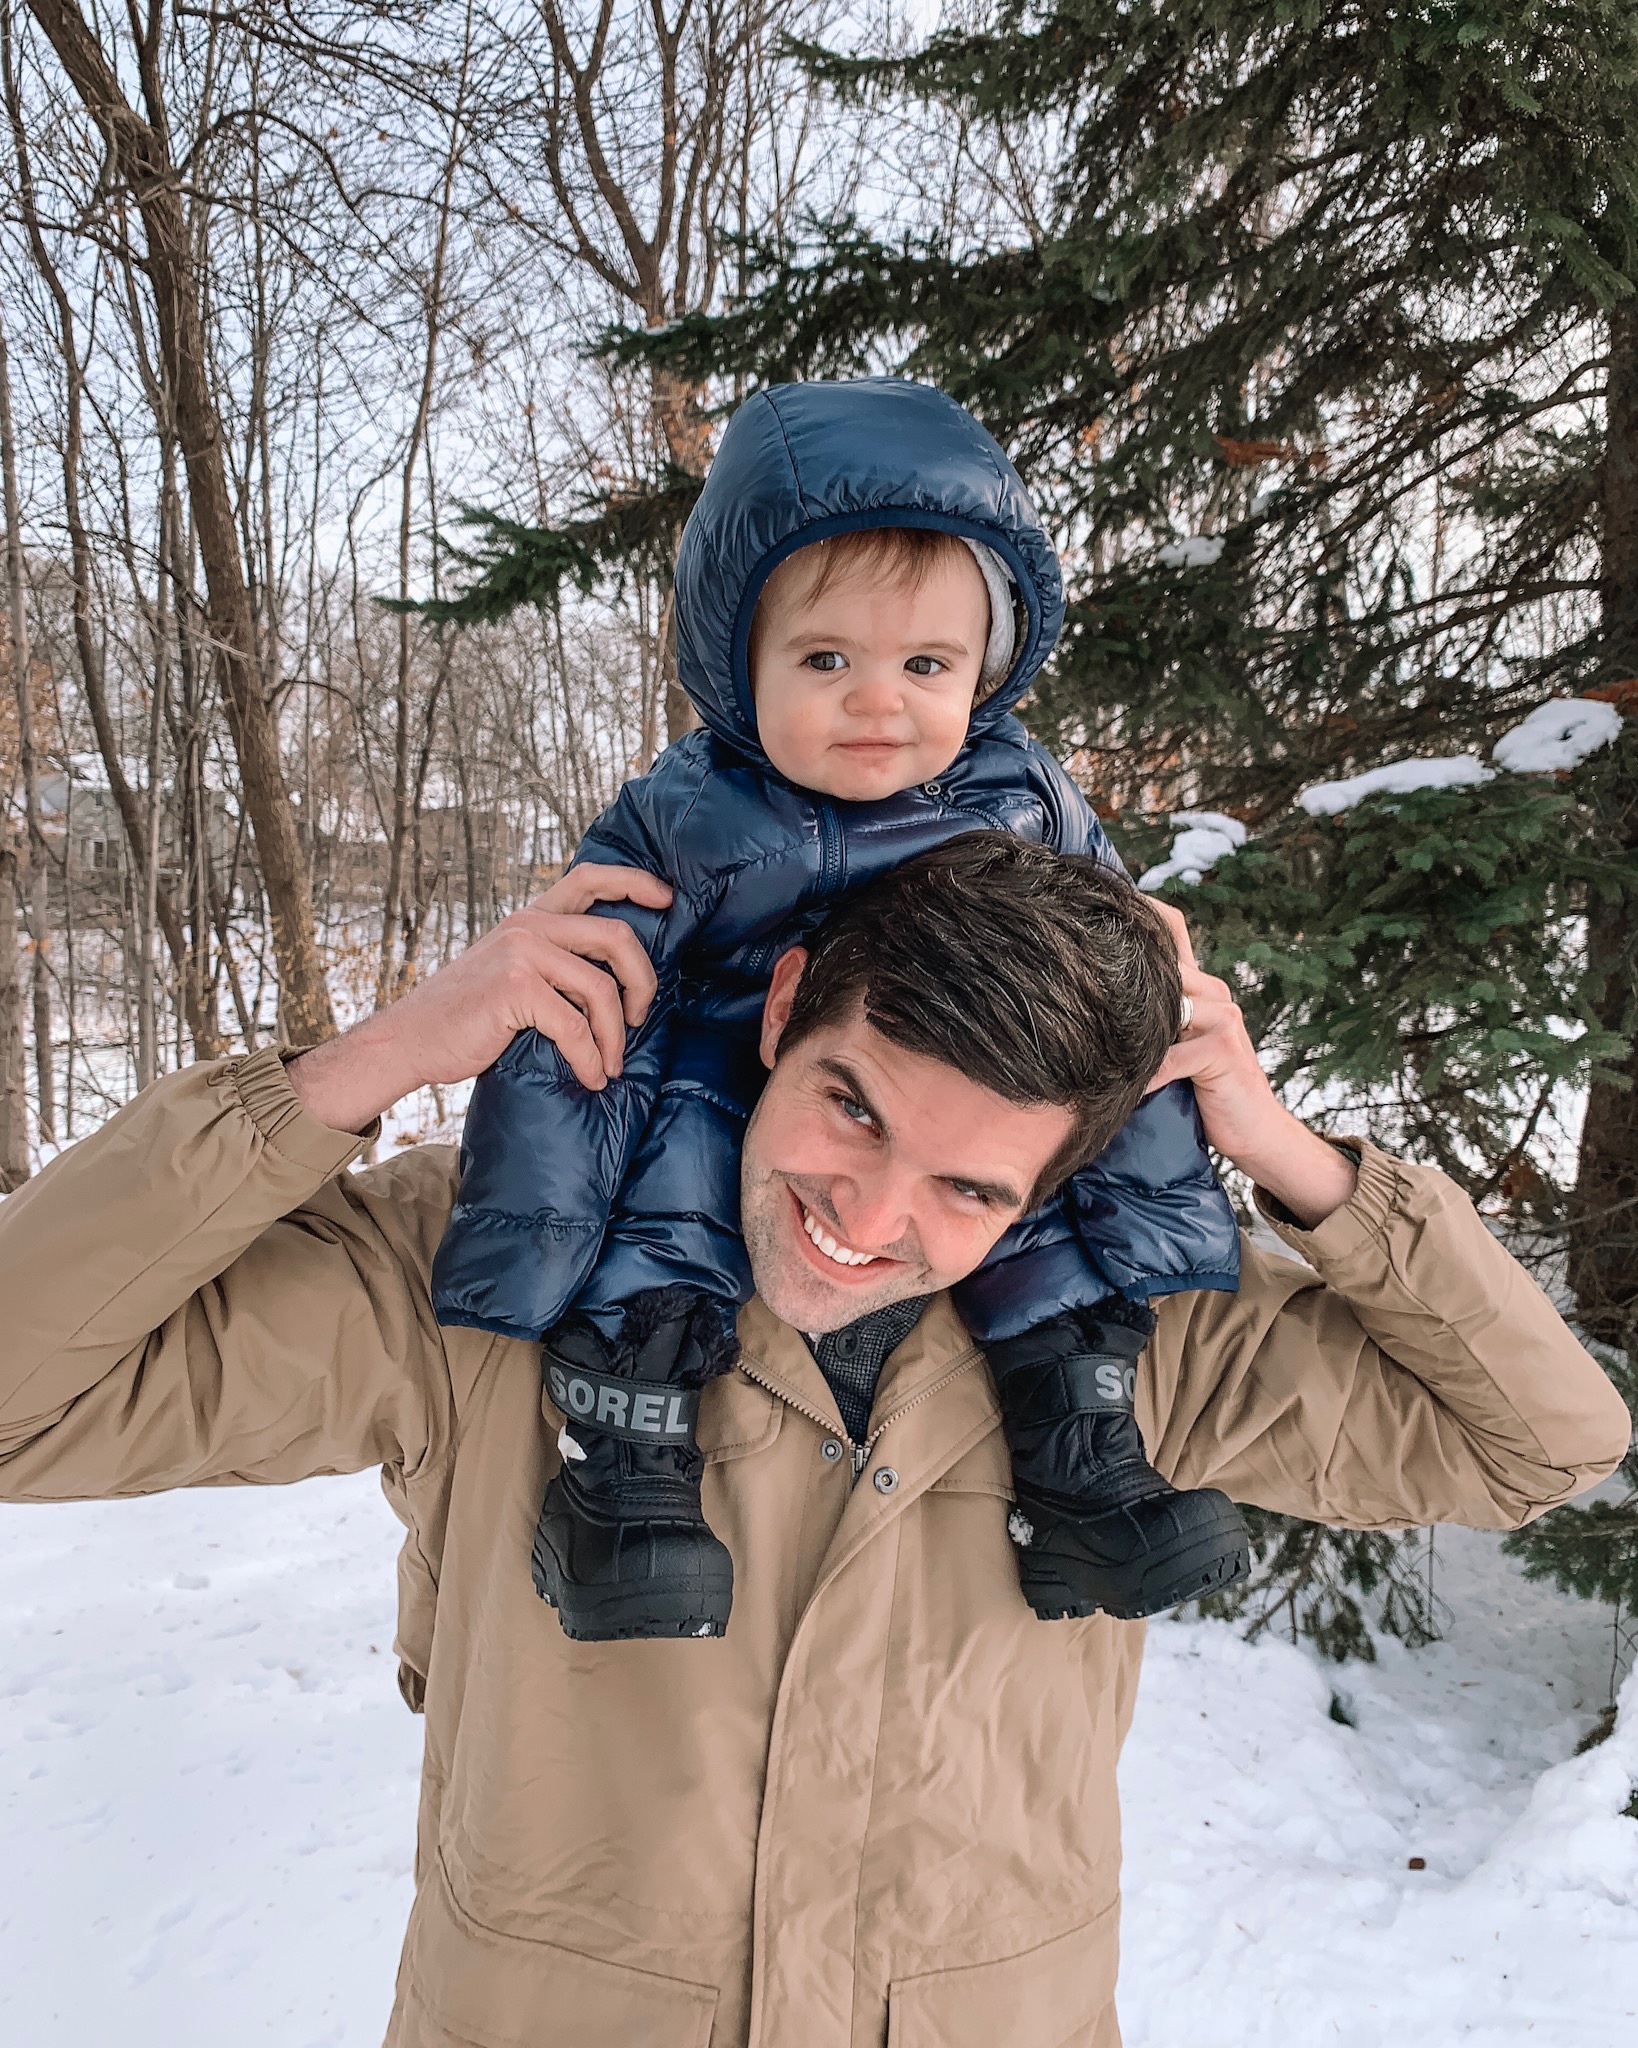 winter wear for family, gift guide, baby snowsuit, Patagonia, Sorel boots toddler, backcountry